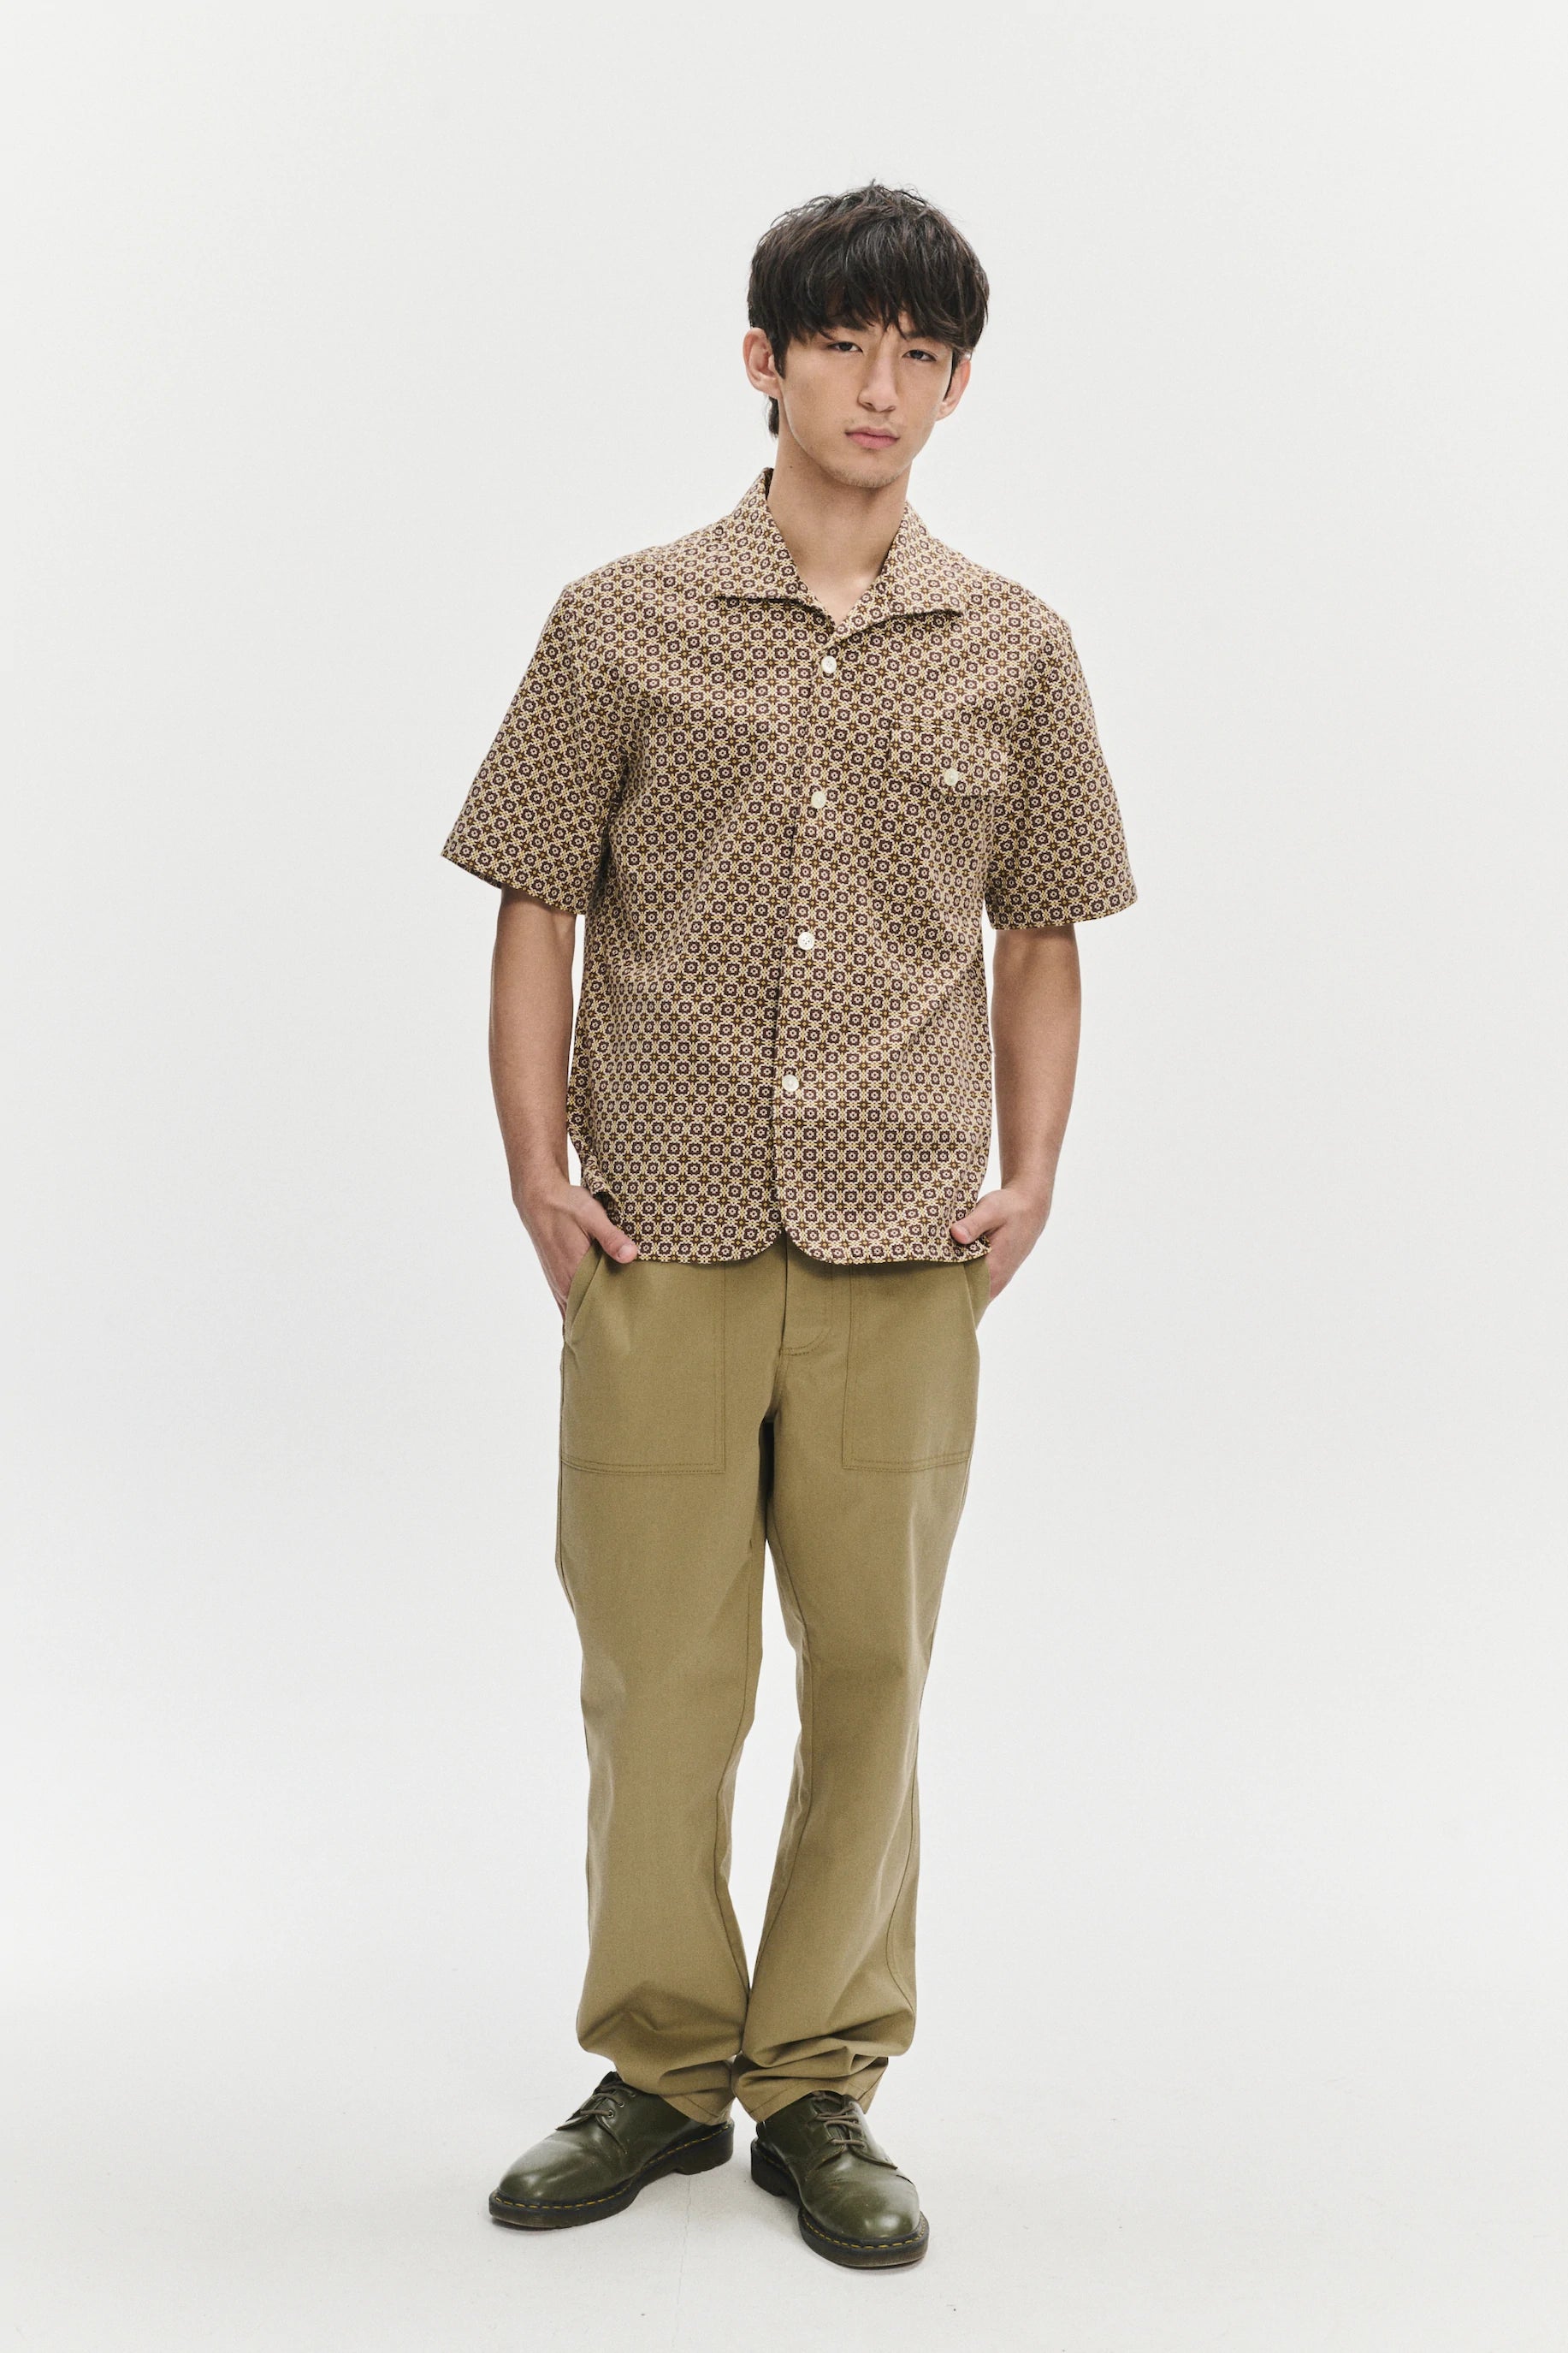 short-sleeve-tiger-spread-collar-shirt-in-a-brown-and-yellow-portuguese-jacquard-woven-cotton